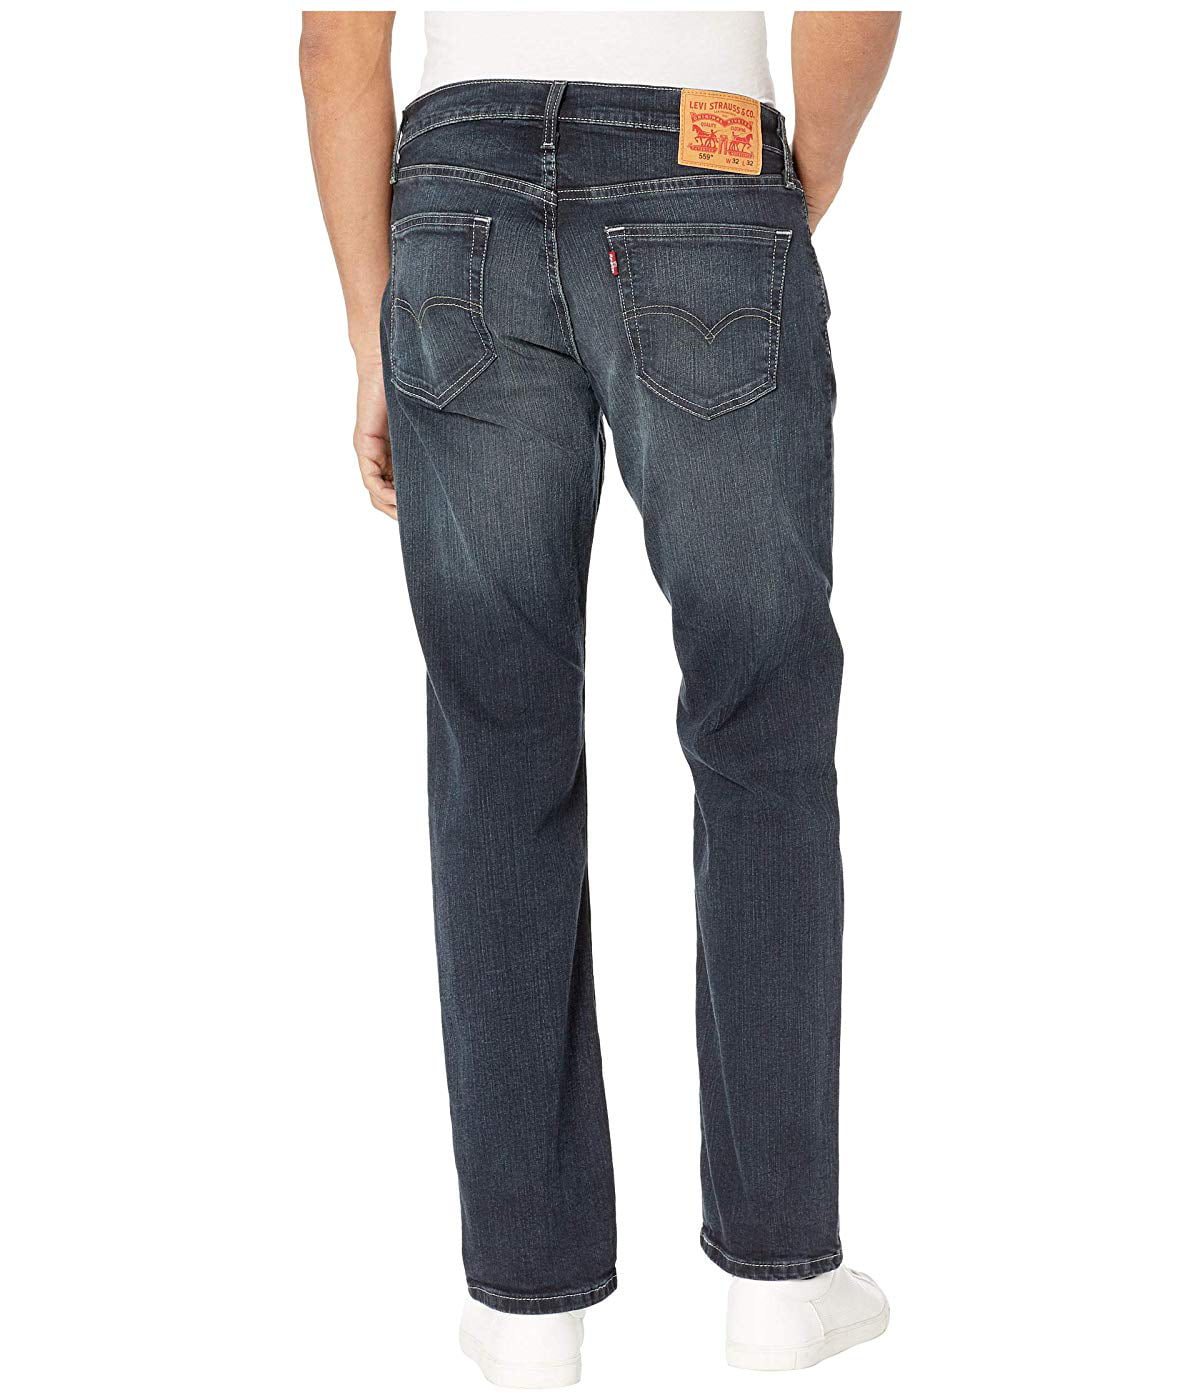 Levi's Men's Big Tall 559 Relaxed Straight Jeans